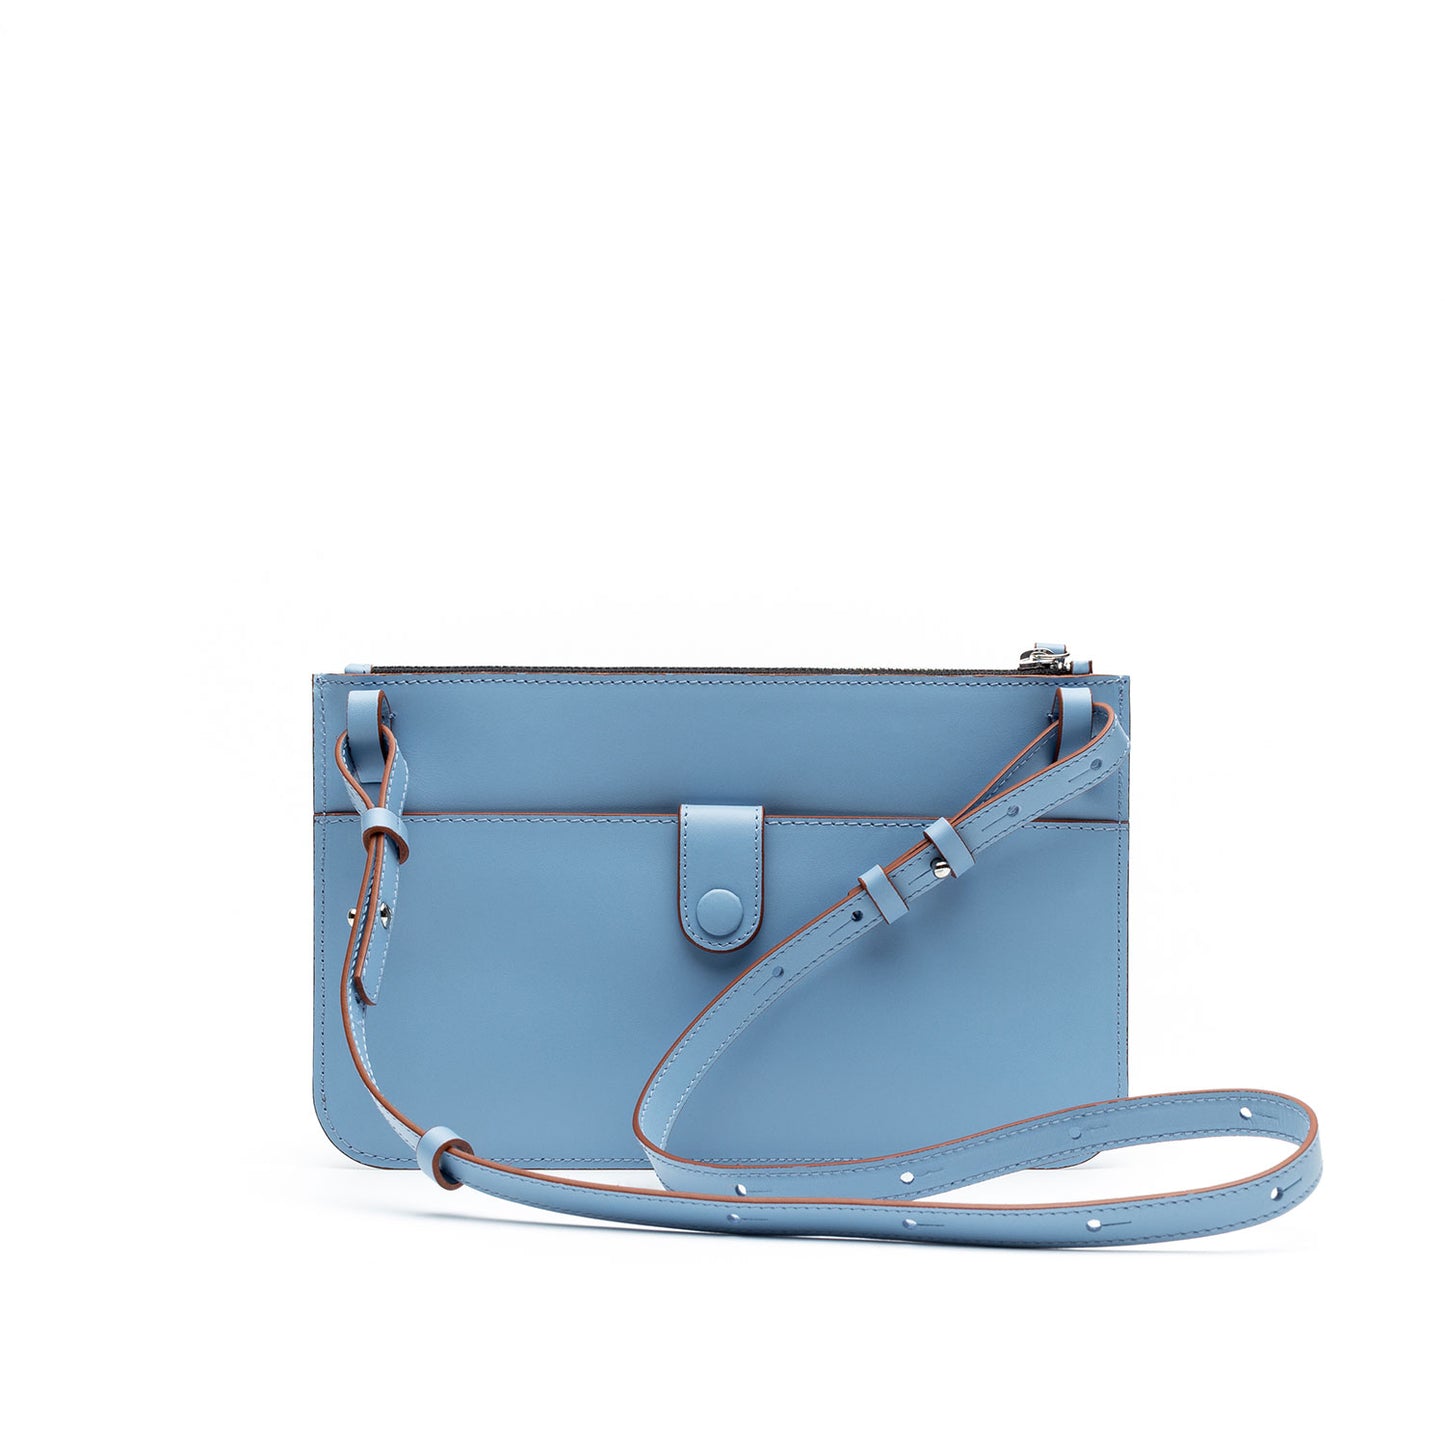 Brooklyn- Light Blue Leather with Camel Trim